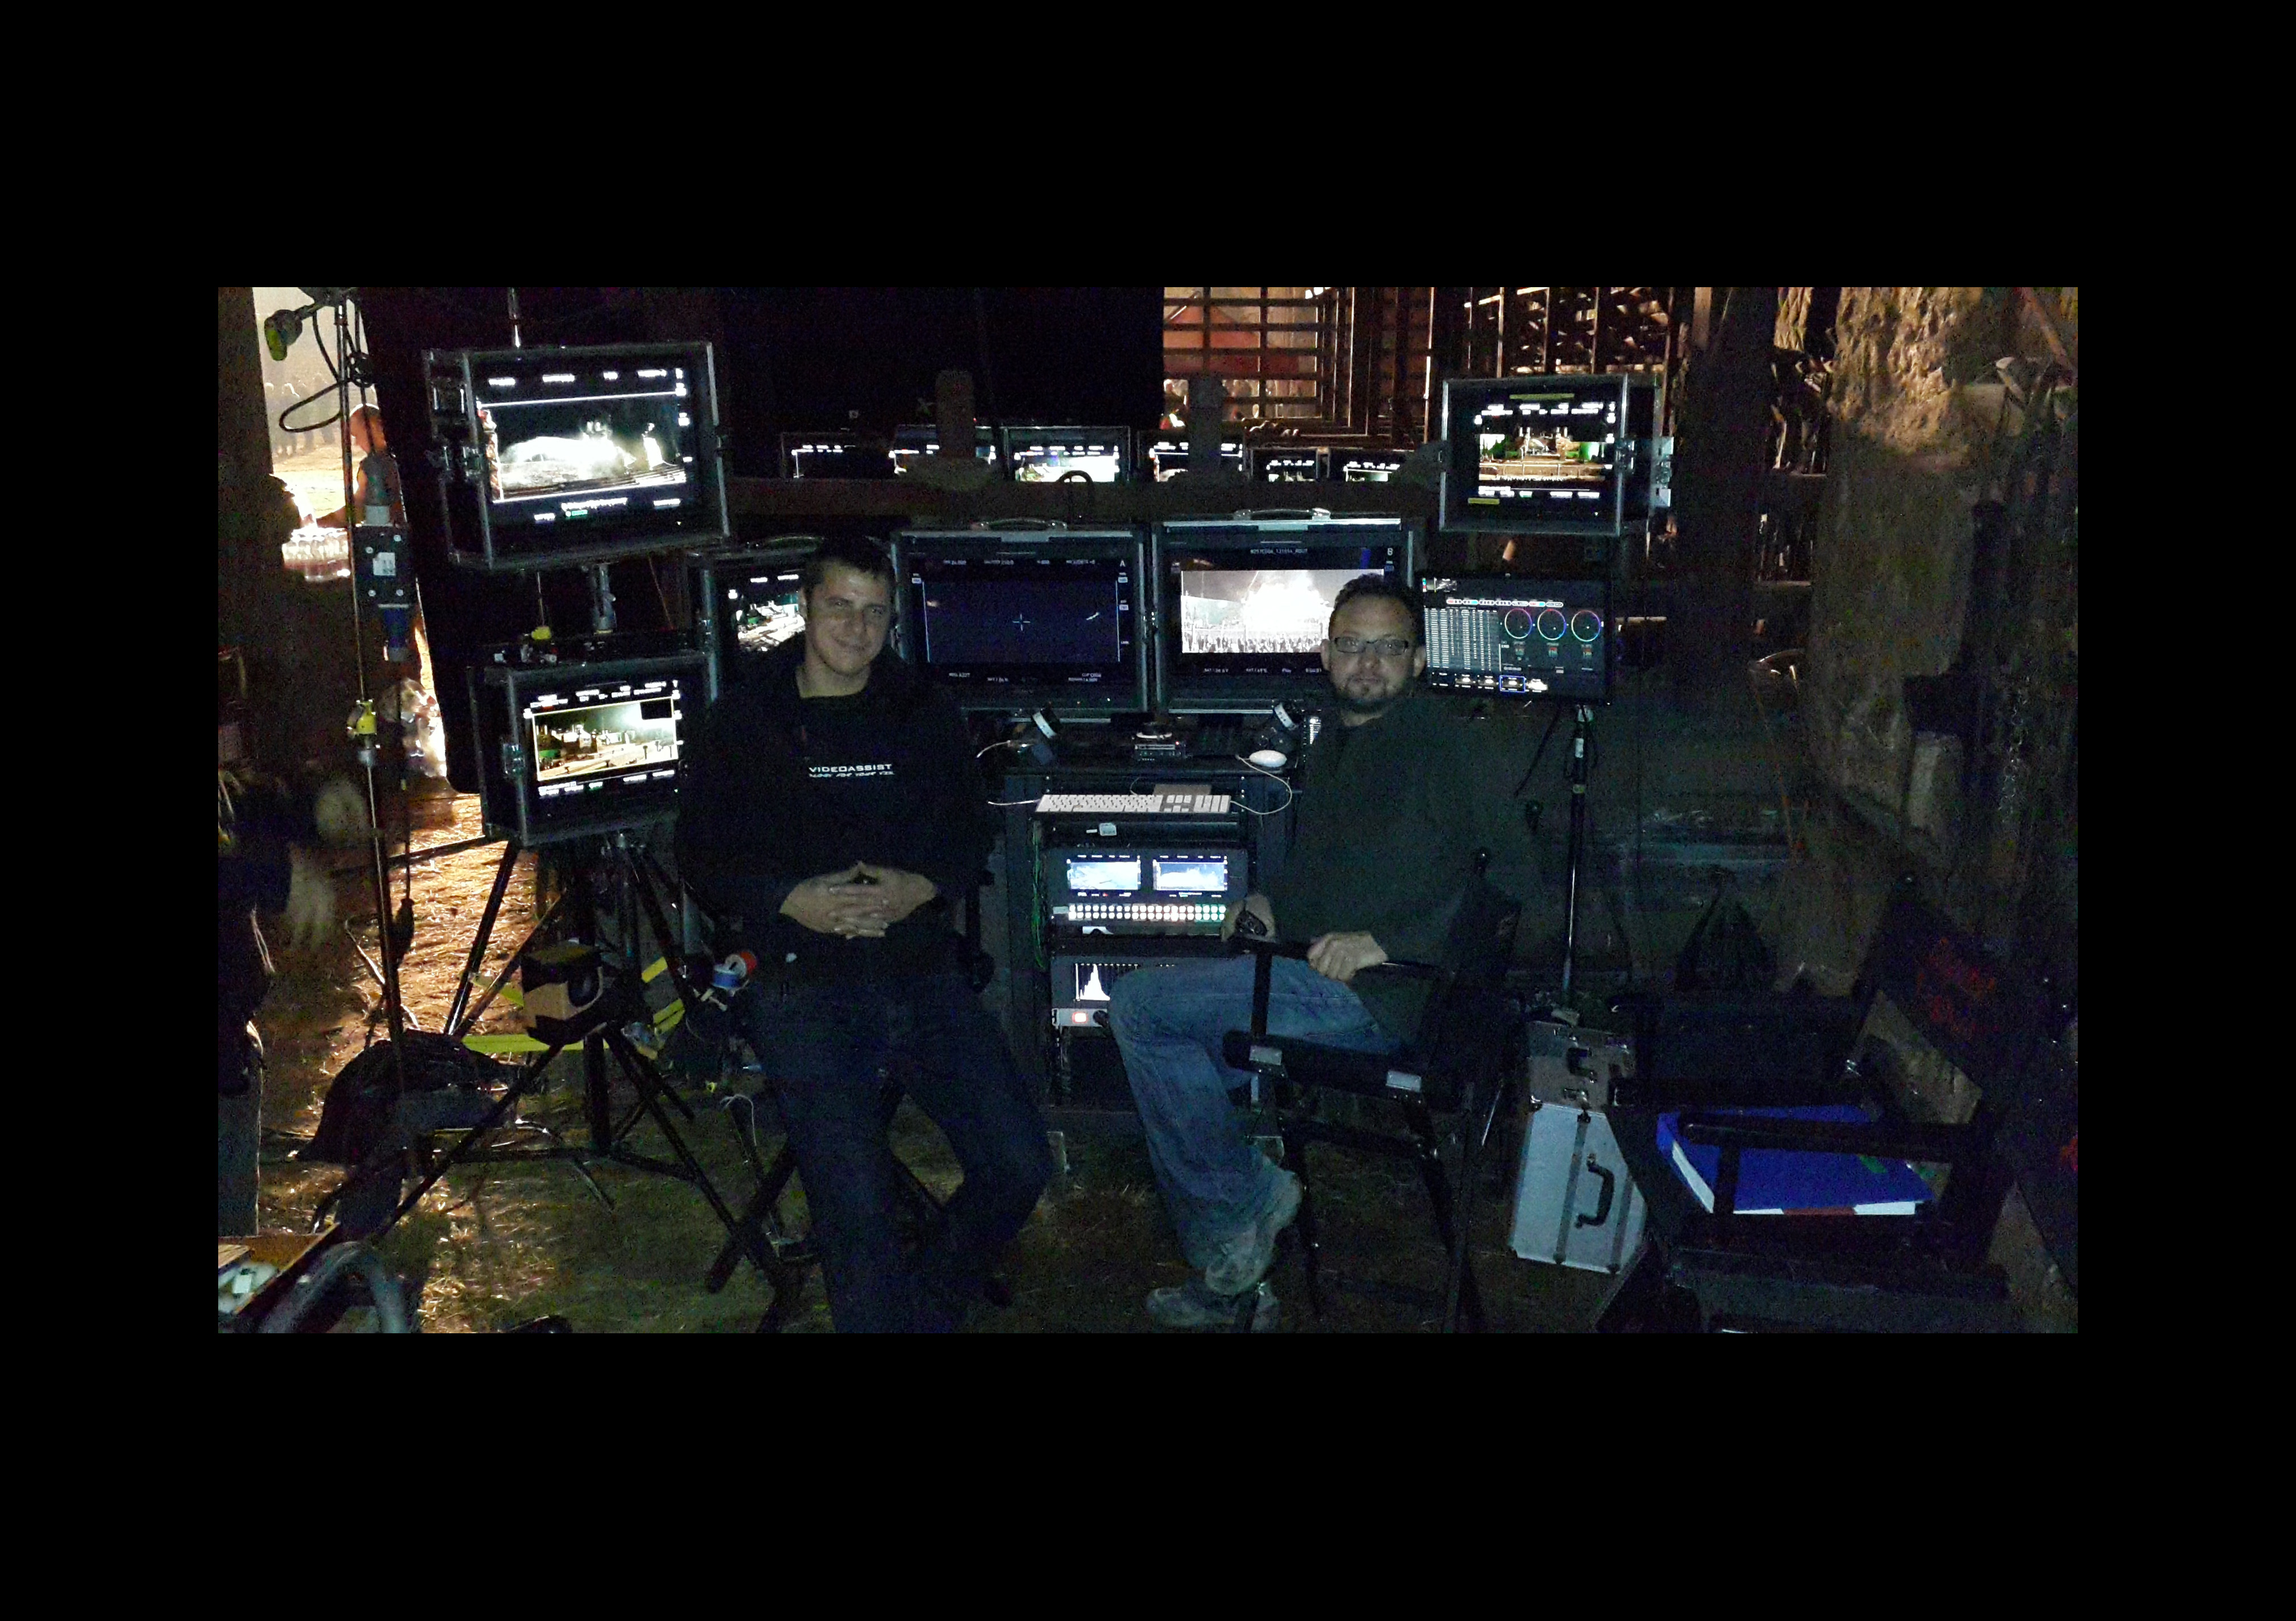 Shooting night scenes in Hercules, with the Director's monitors in the next row. With Assistant Operator Krisztián Nagy